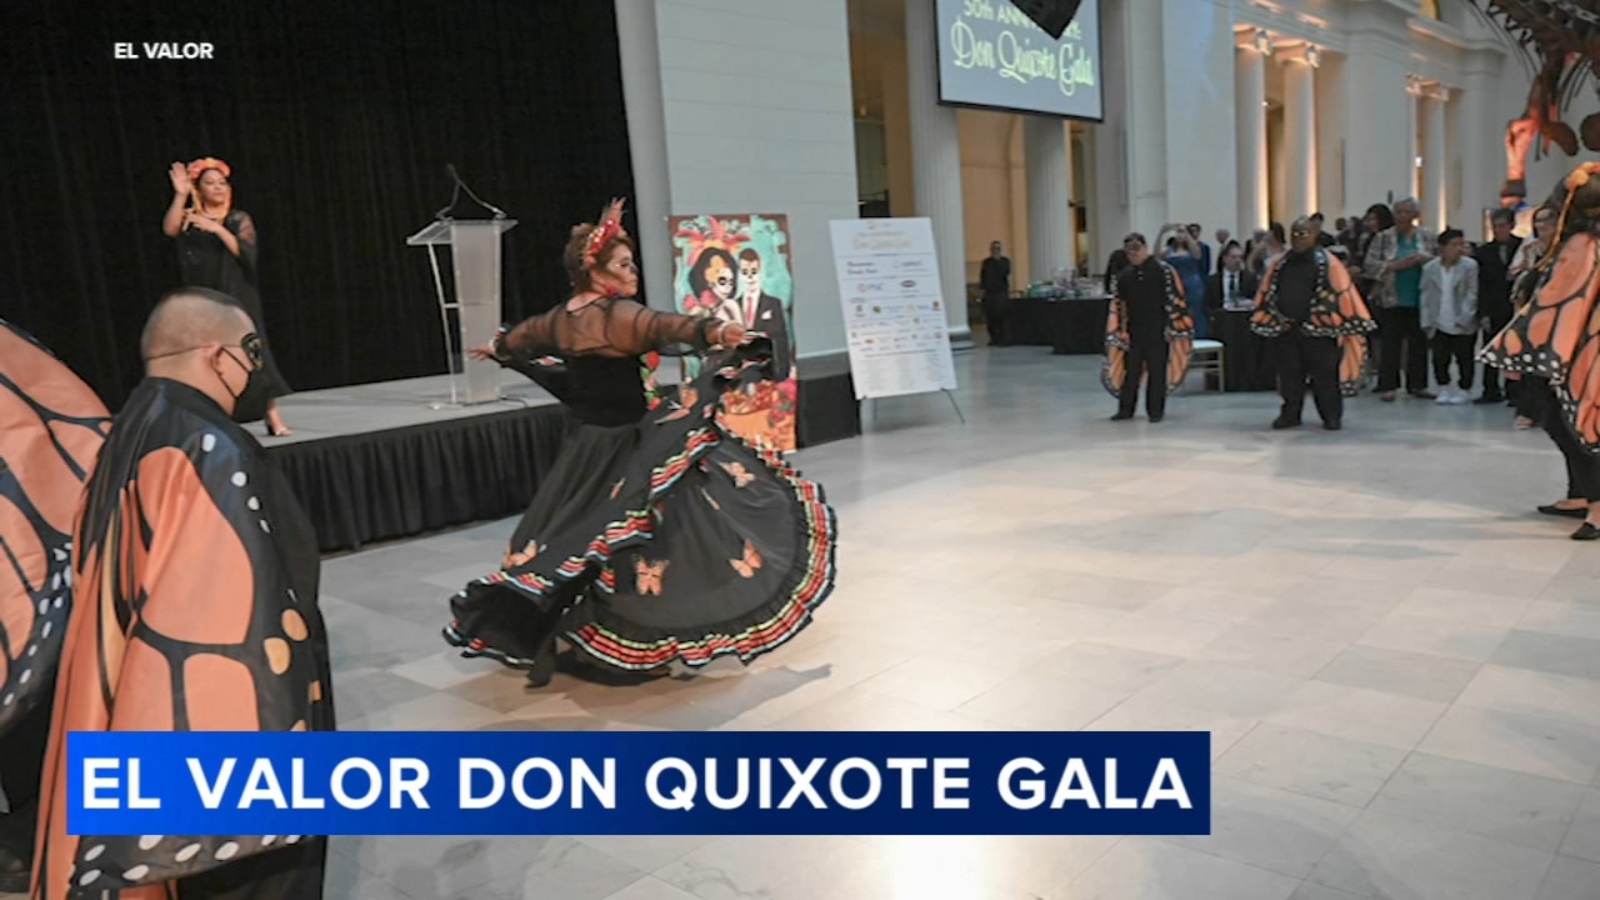 El Valor’s annual Don Quixote Gala to raise money for Chicago adults, children with disabilities [Video]